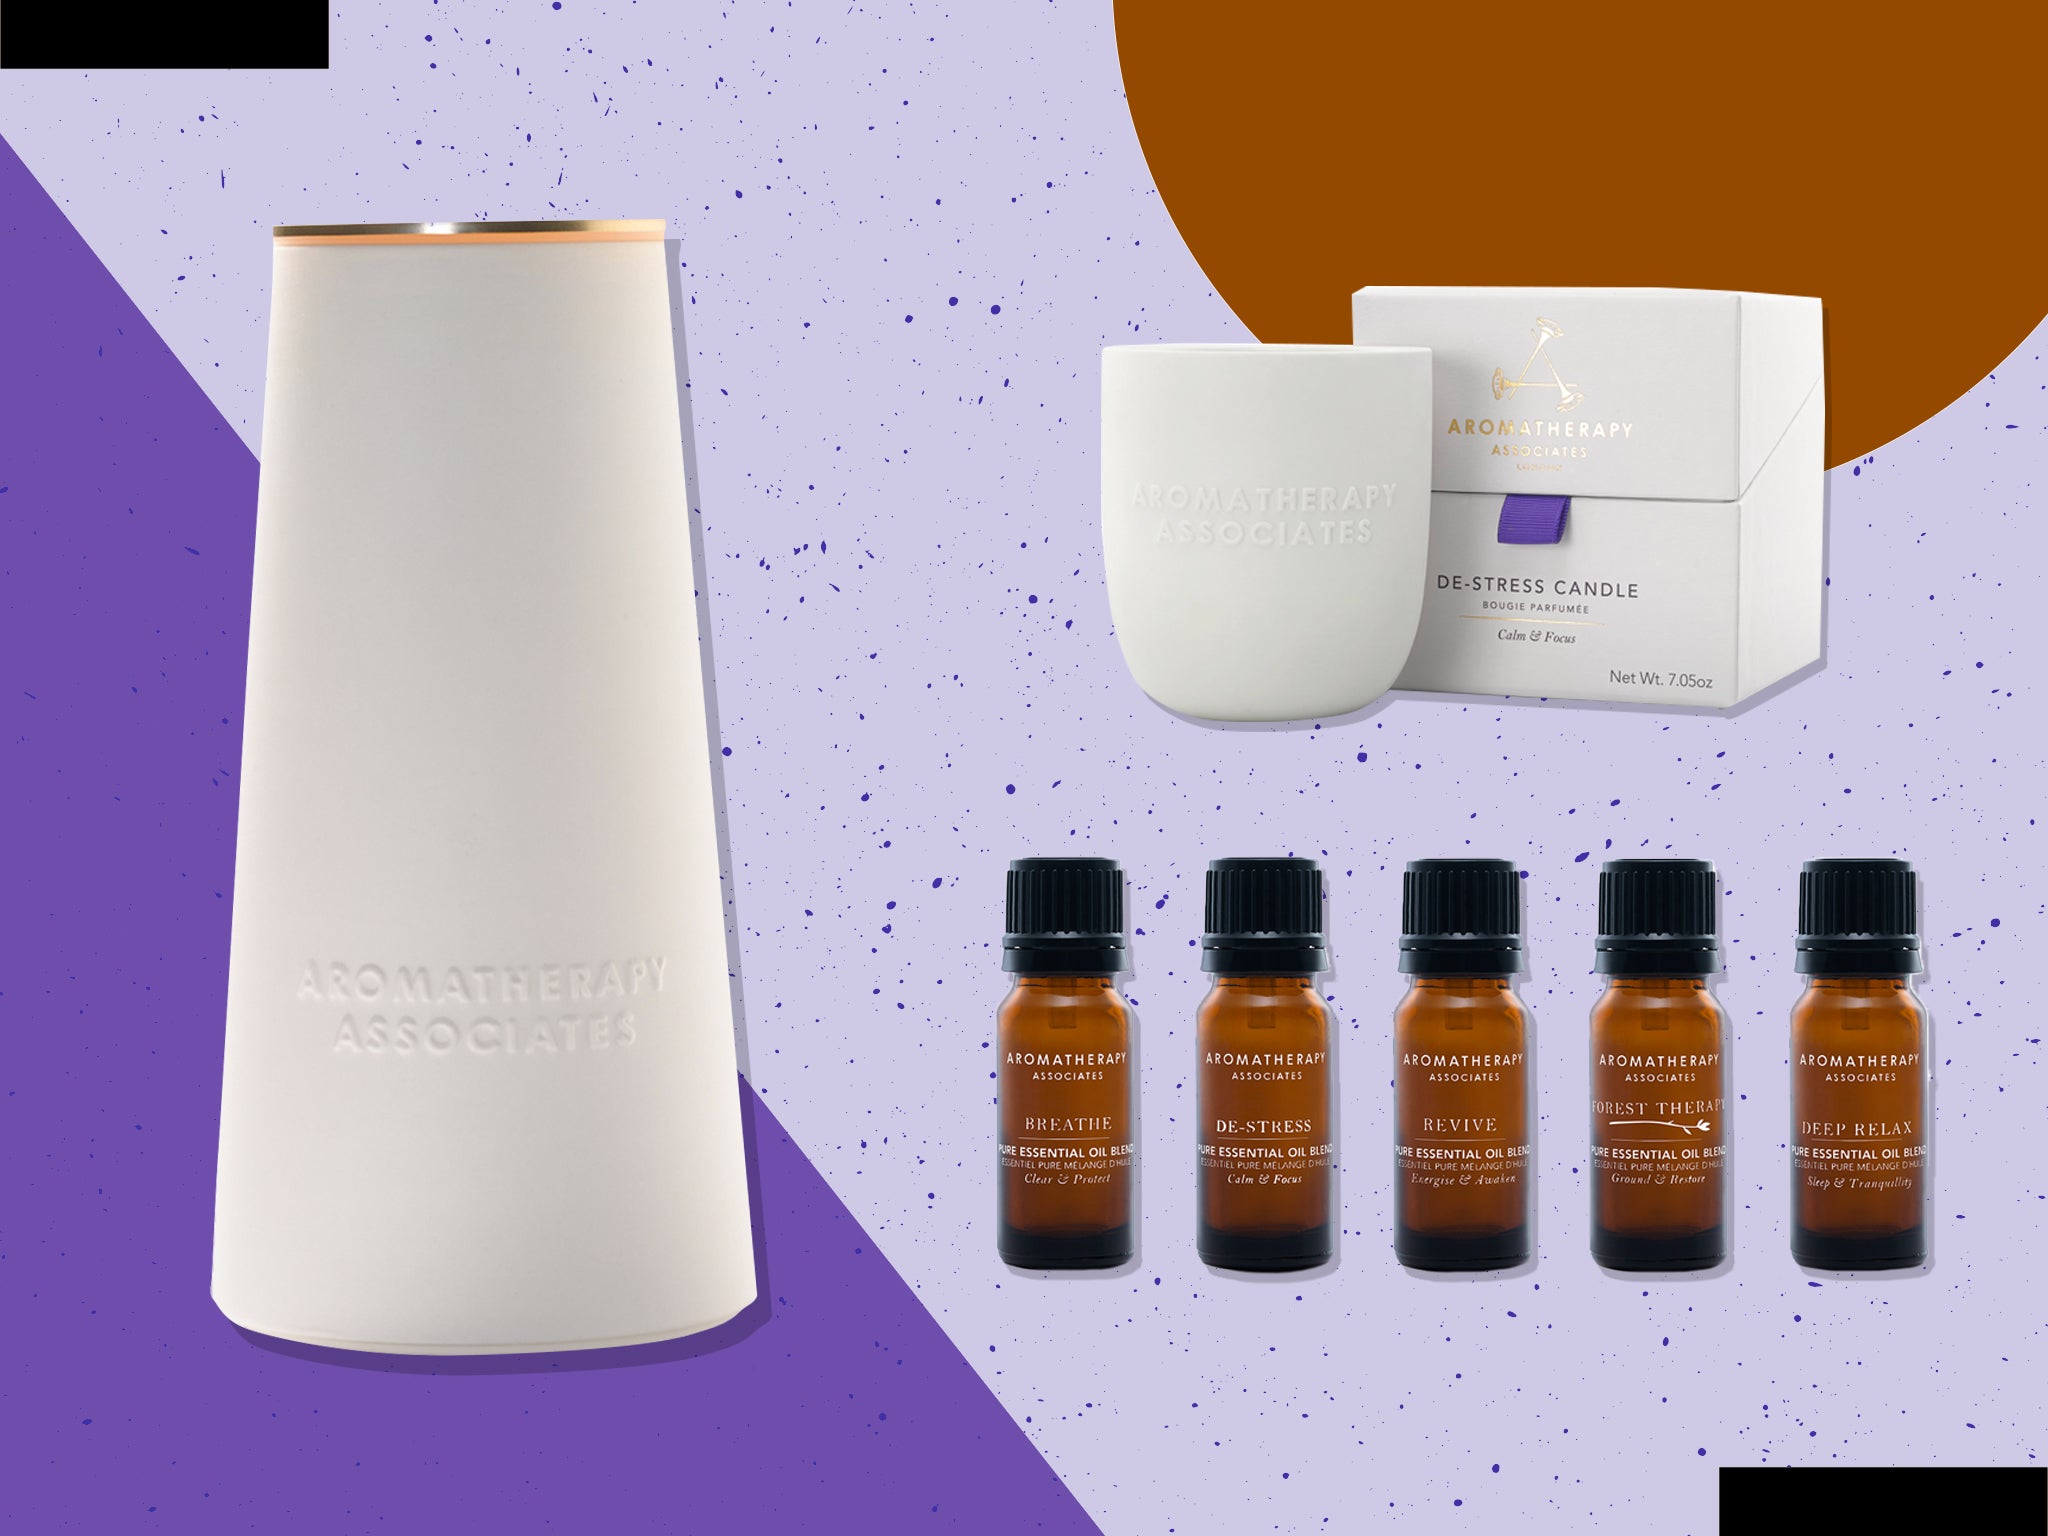 The range includes a new diffuser with fine mist waterless innovation and accompanying essential oils, plus candles in the brand’s bestselling scents